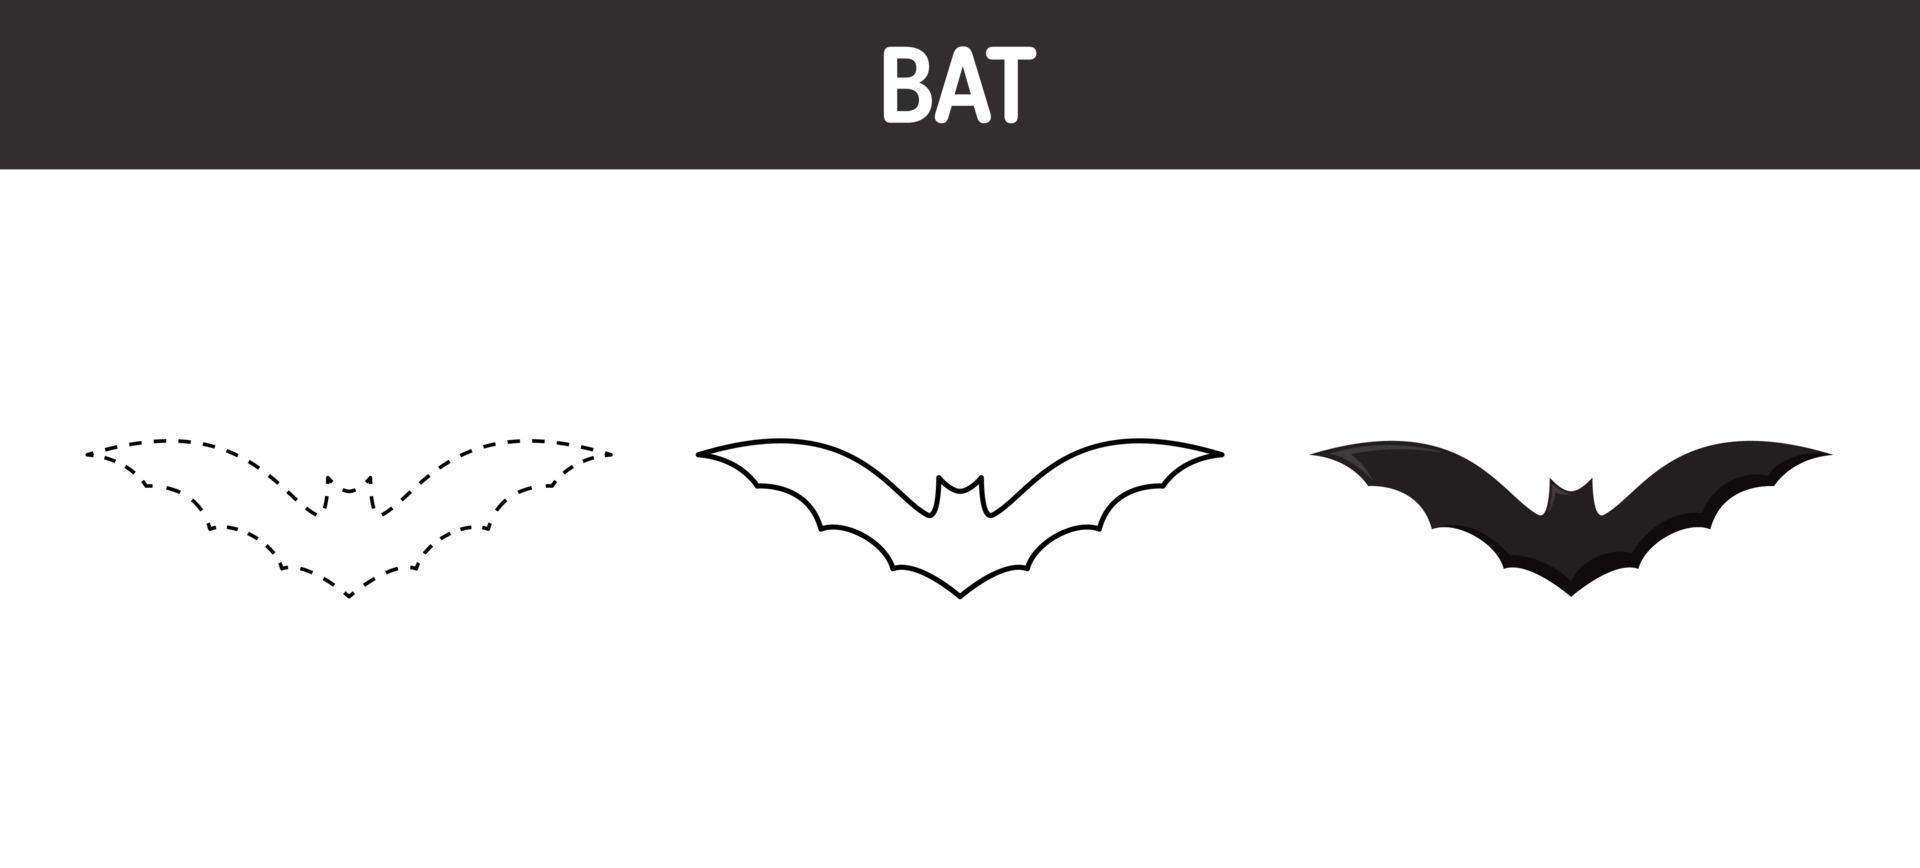 Bat tracing and coloring worksheet for kids vector